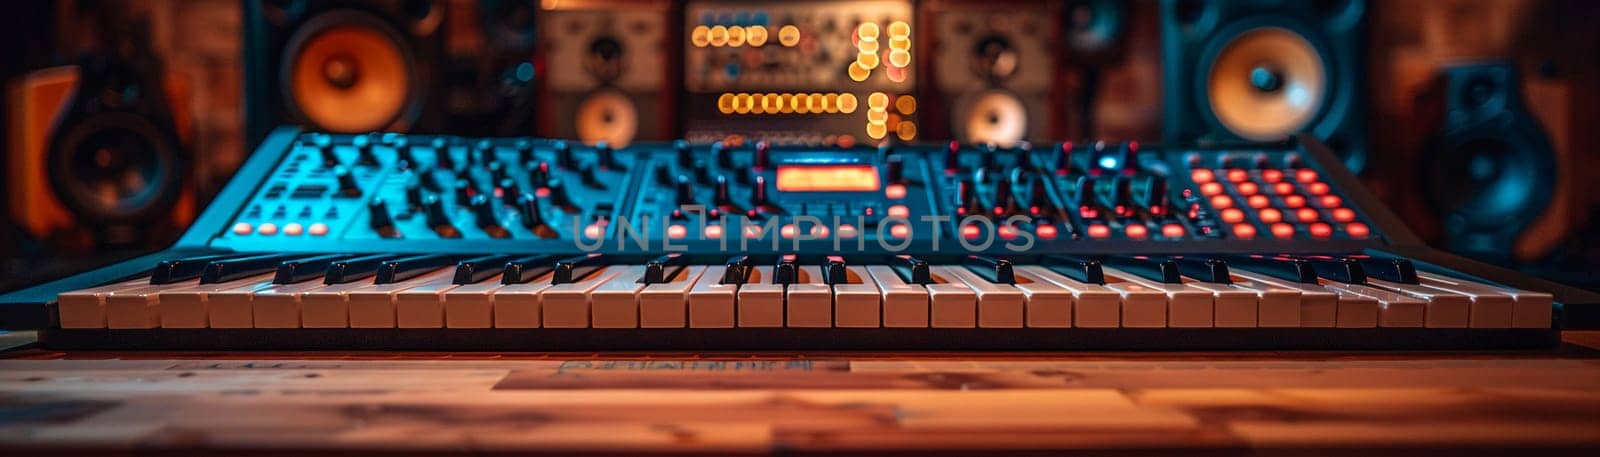 Music Studio Hub Composes Tracks of Innovation in Business of Artistic Audio Production, Studio keyboards and soundproofing compose tracks of innovation and artistic audio production in the music studio hub business.